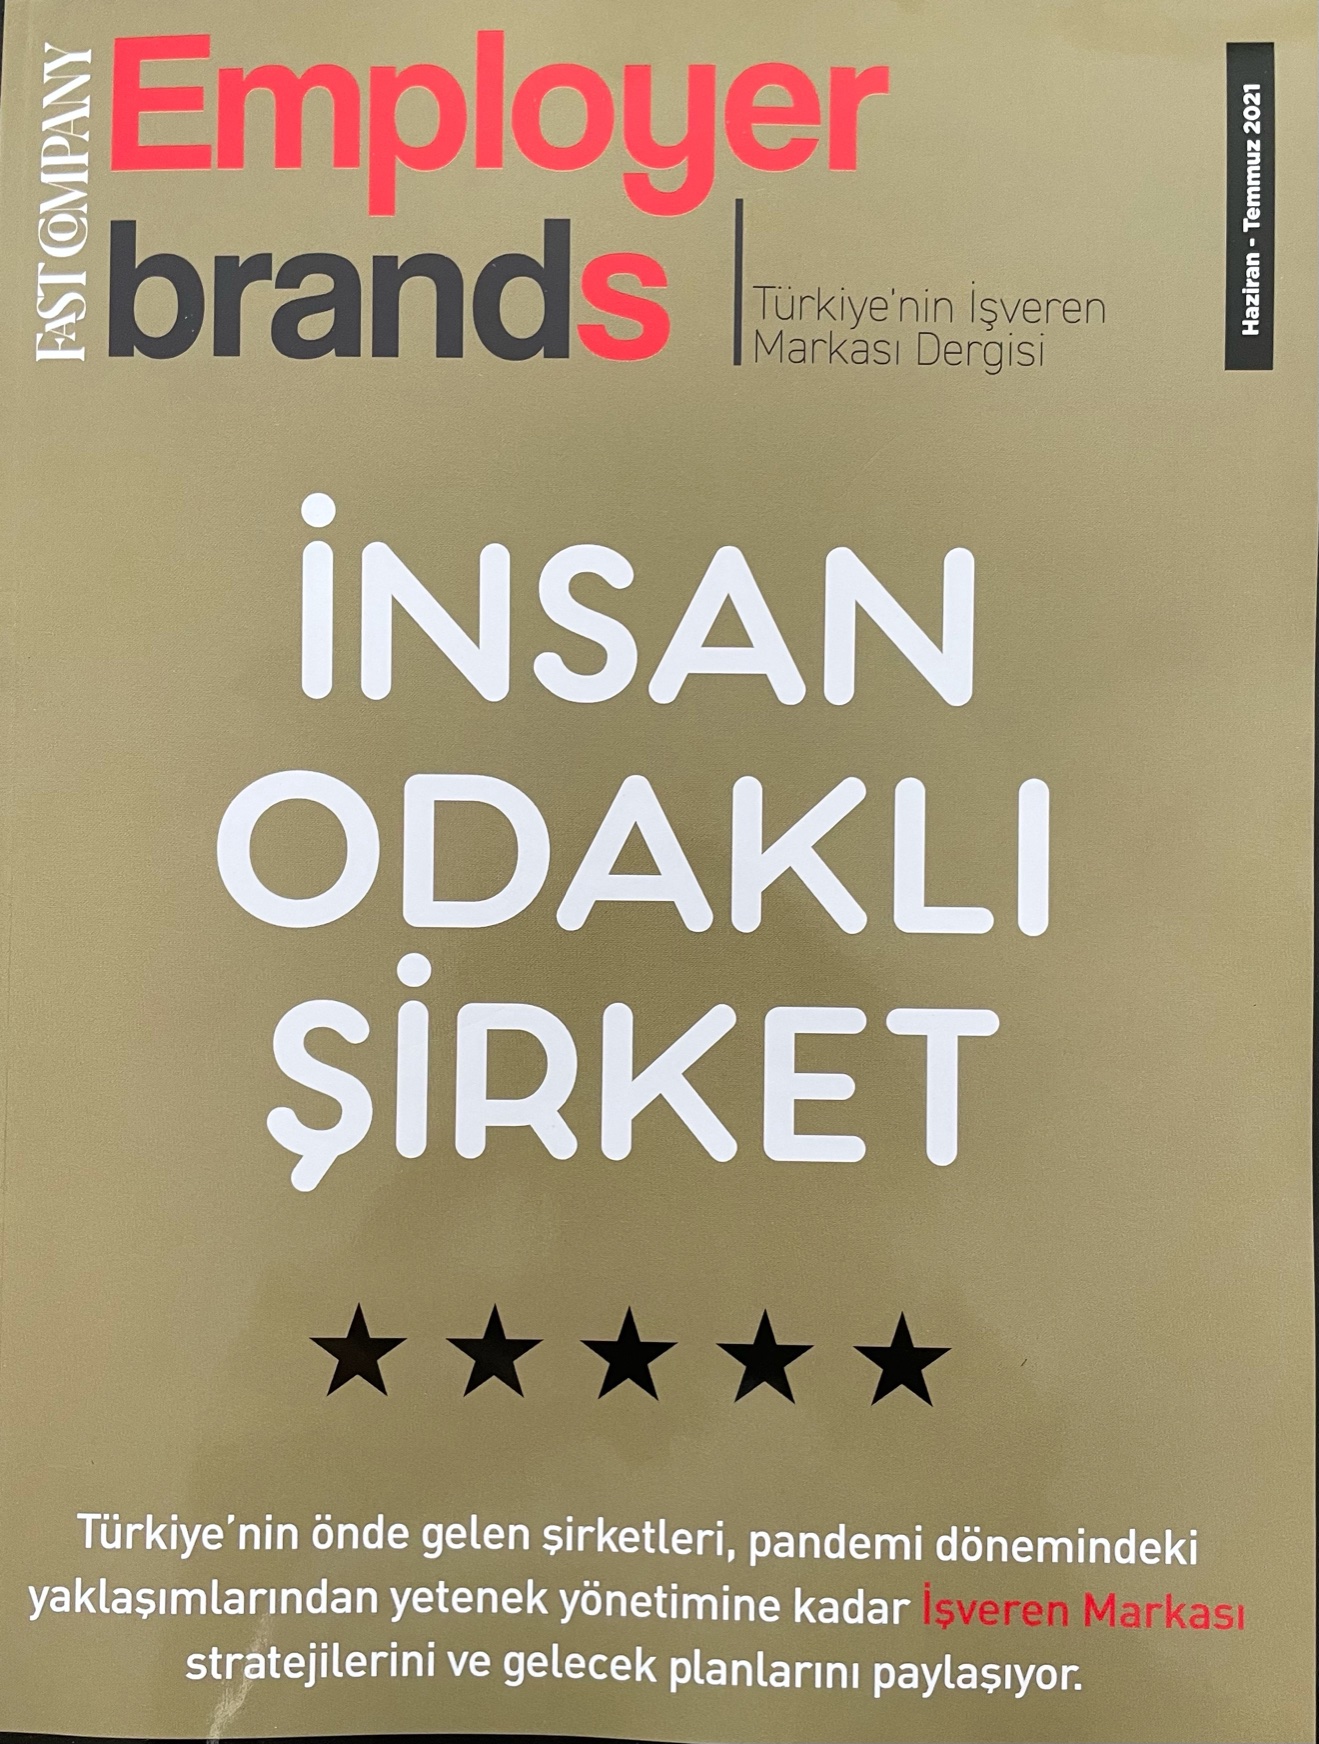 Oxygen to the Competitive Business World - Fast Company Turkey June-July 2021